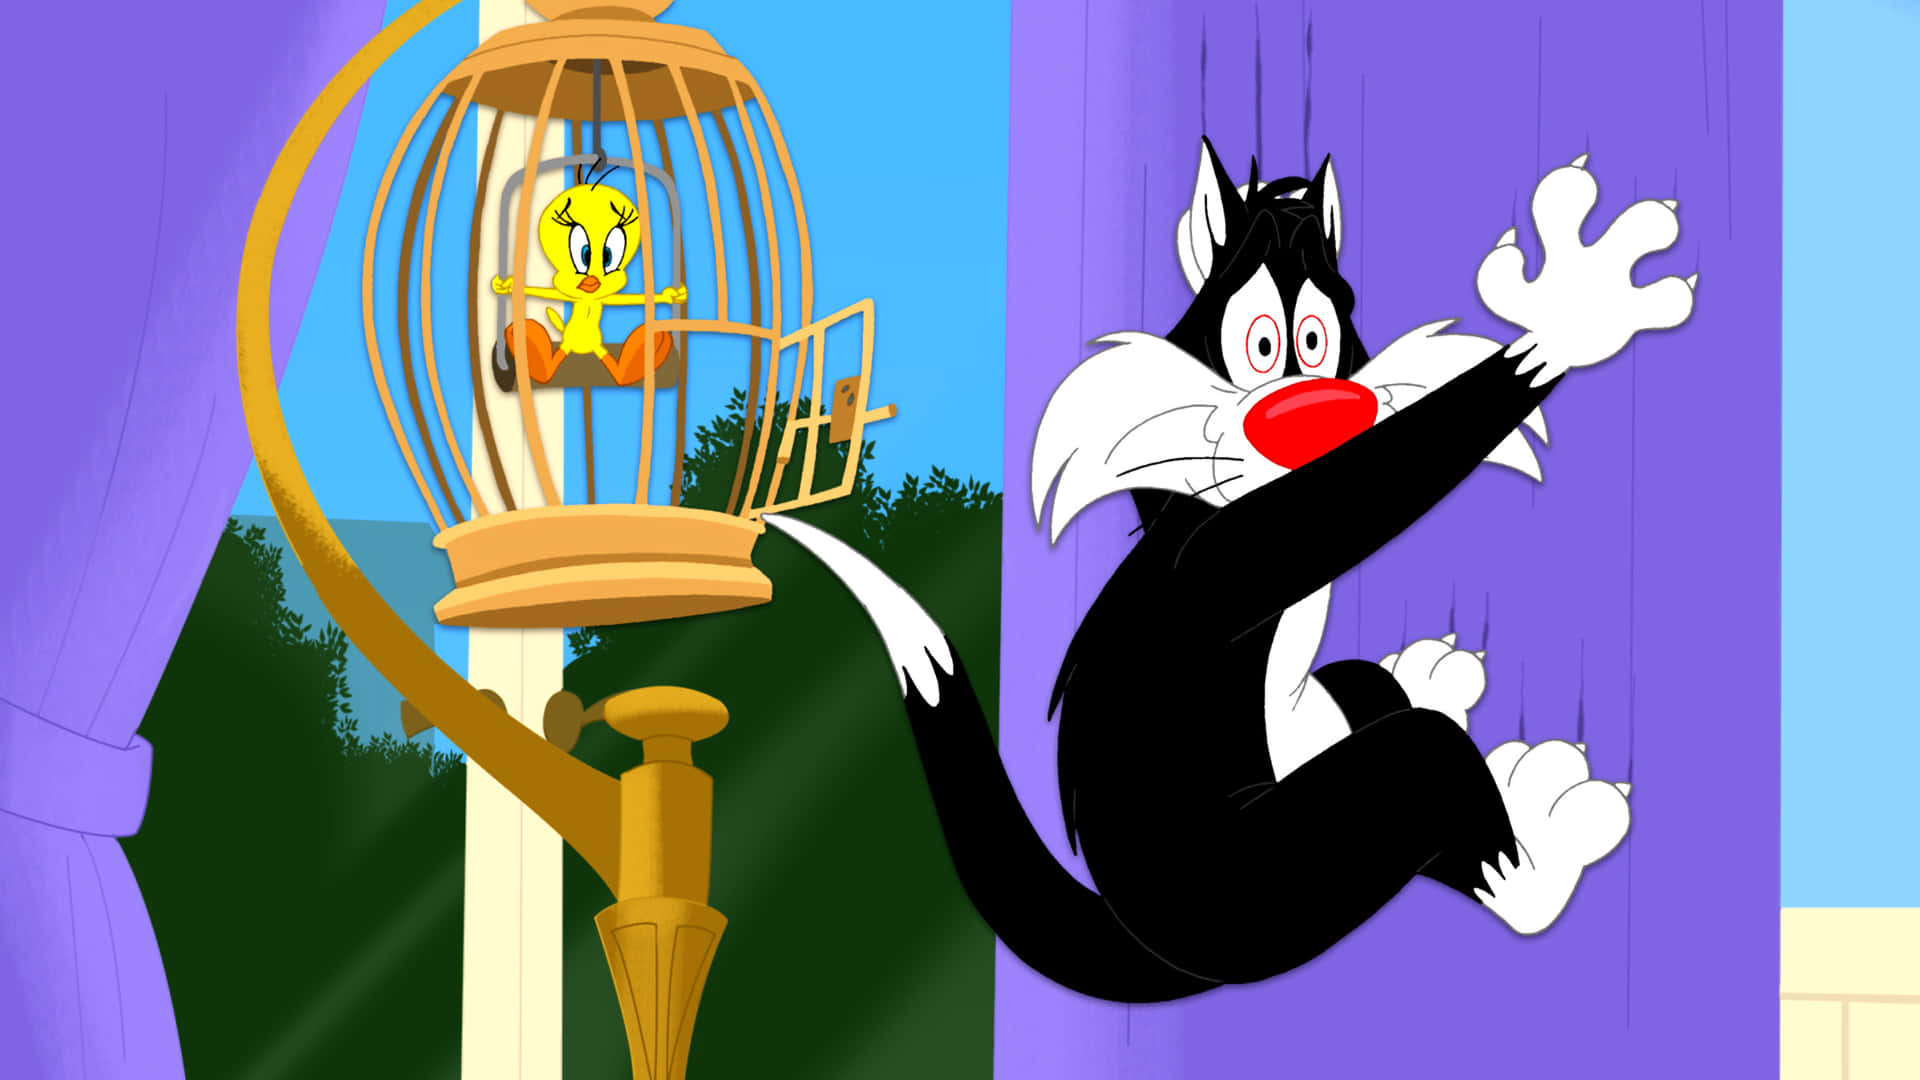 Enjoy classic Looney Tunes characters, here featured in their wacky and zany nature.